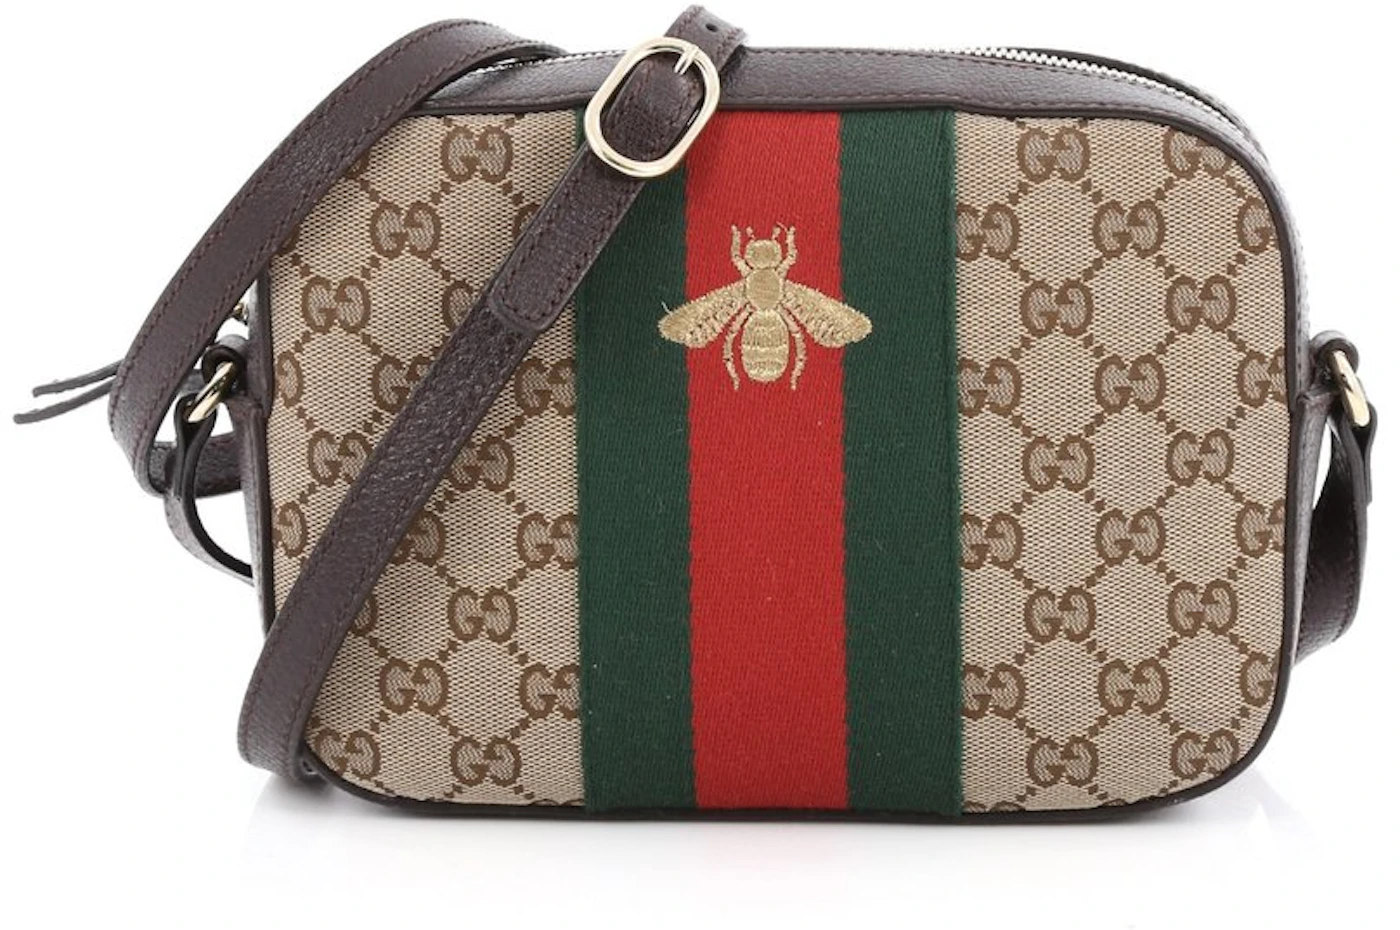 Gucci Red Leather Webby Bee Crossbody Bag Gucci